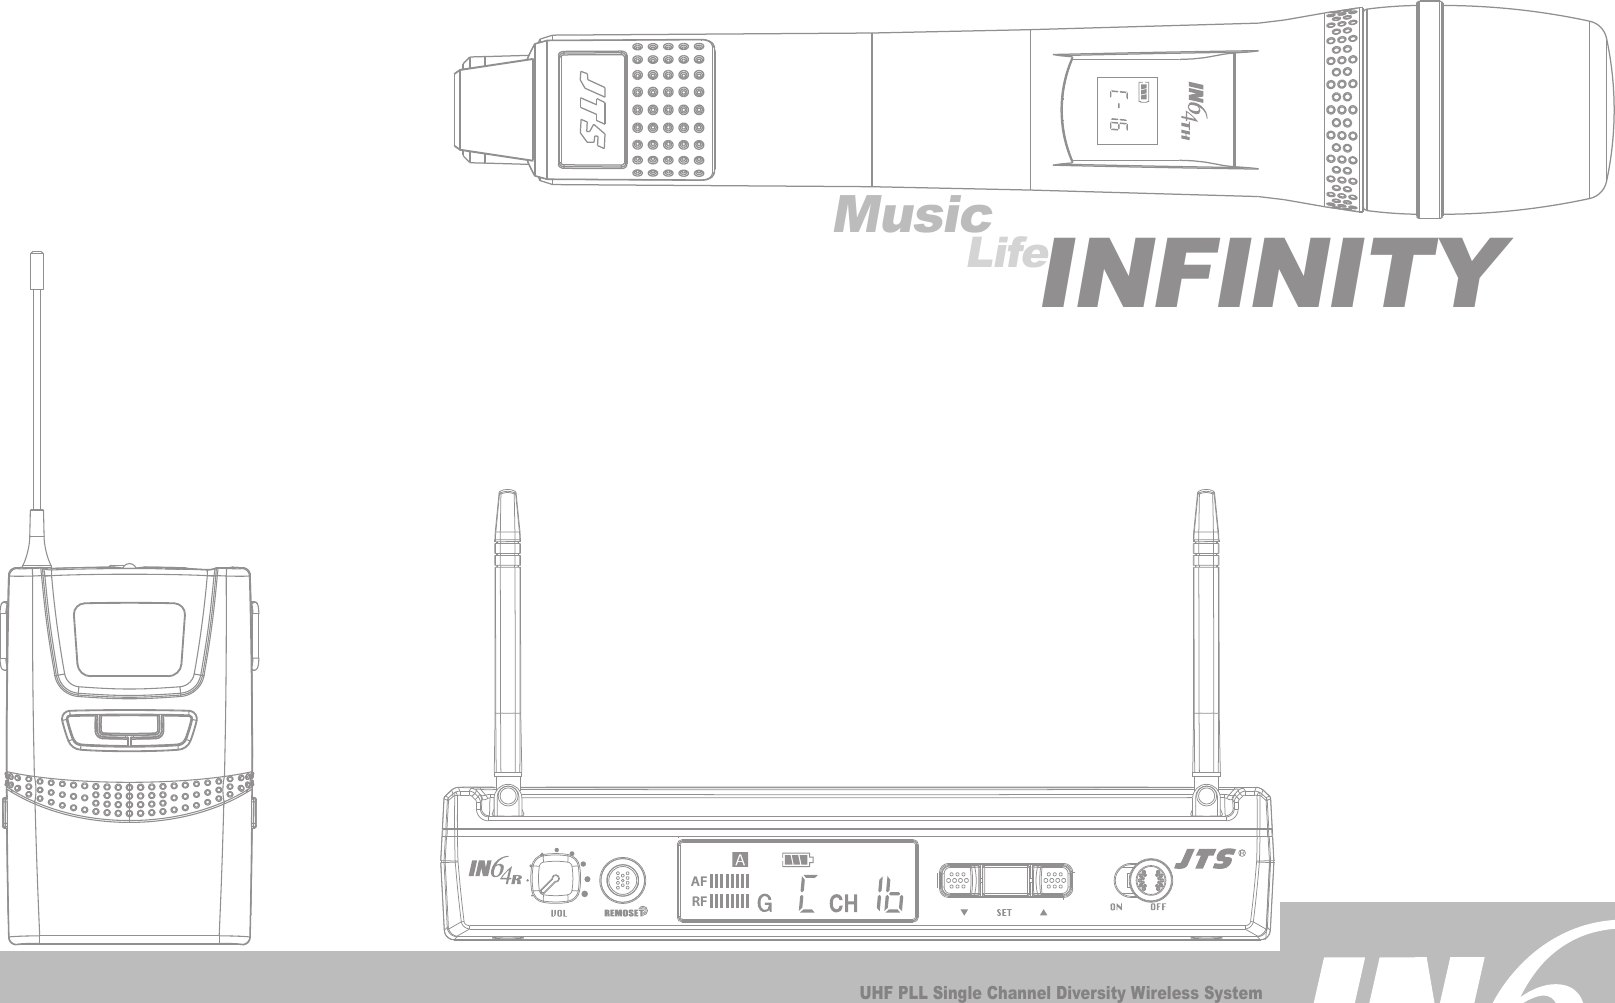 UHF PLL Single Channel Diversity Wireless System* The system is the initiative design to allow changing the transmitter’s  frequency by long-distance worldwide.* Preset 4 groups each of 16 UHF channels.MusicLifeINFINITYAFRF